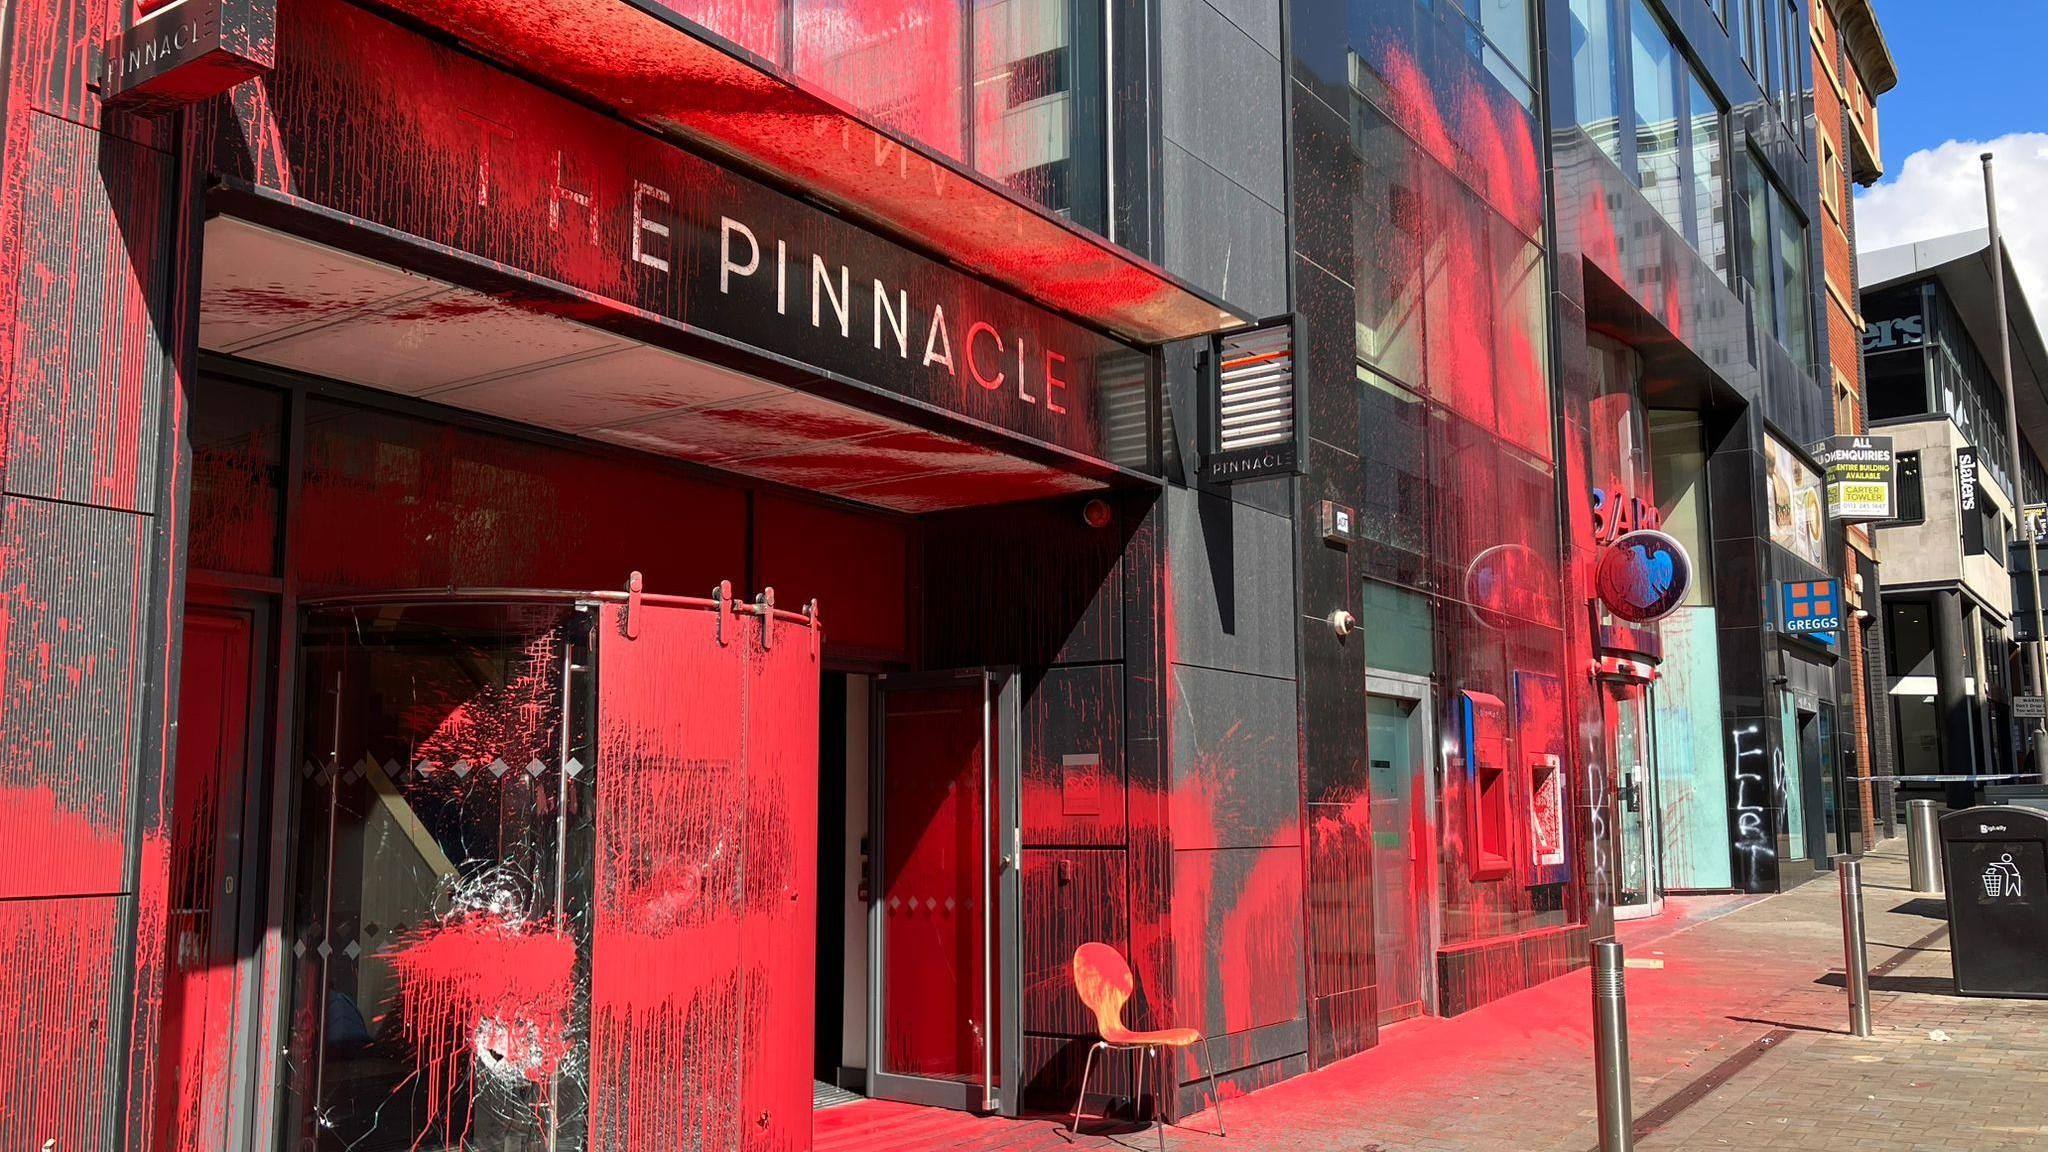 The Pinnacle building in Leeds covered in red spray paint